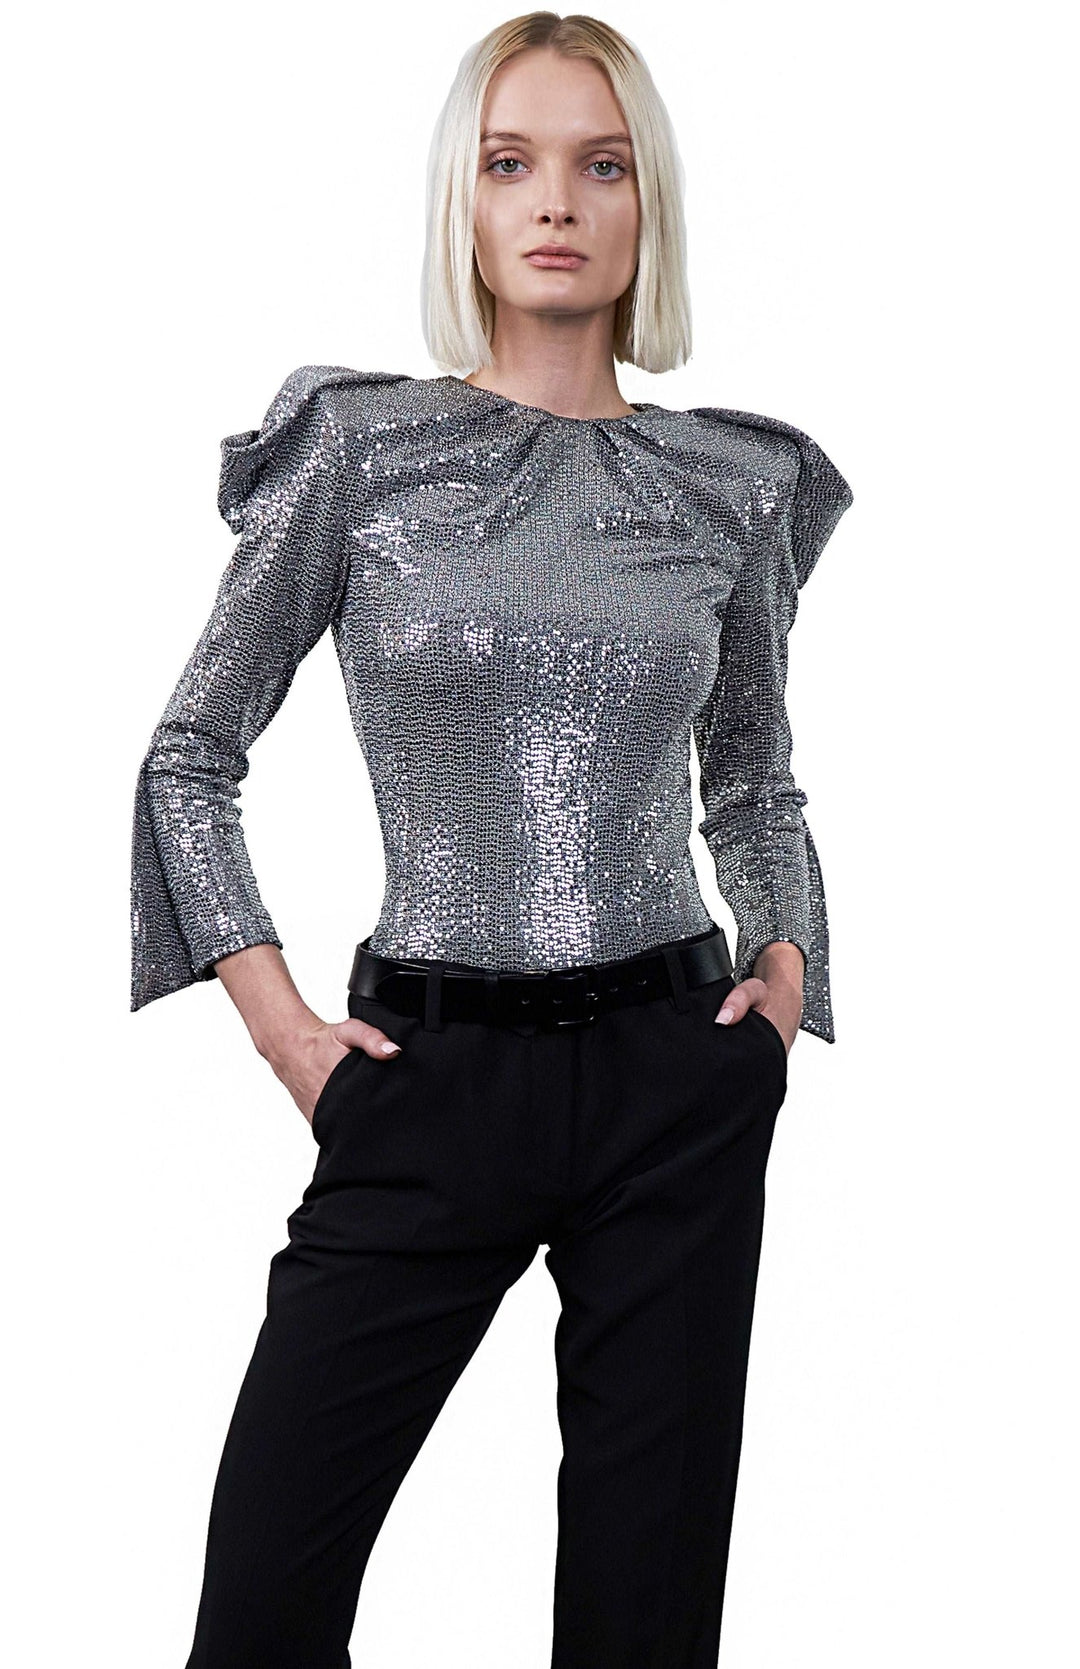 Chic, silver, high shoulder, sequin bodysuit, with draped sleeves, closed neck and high shoulderpads.